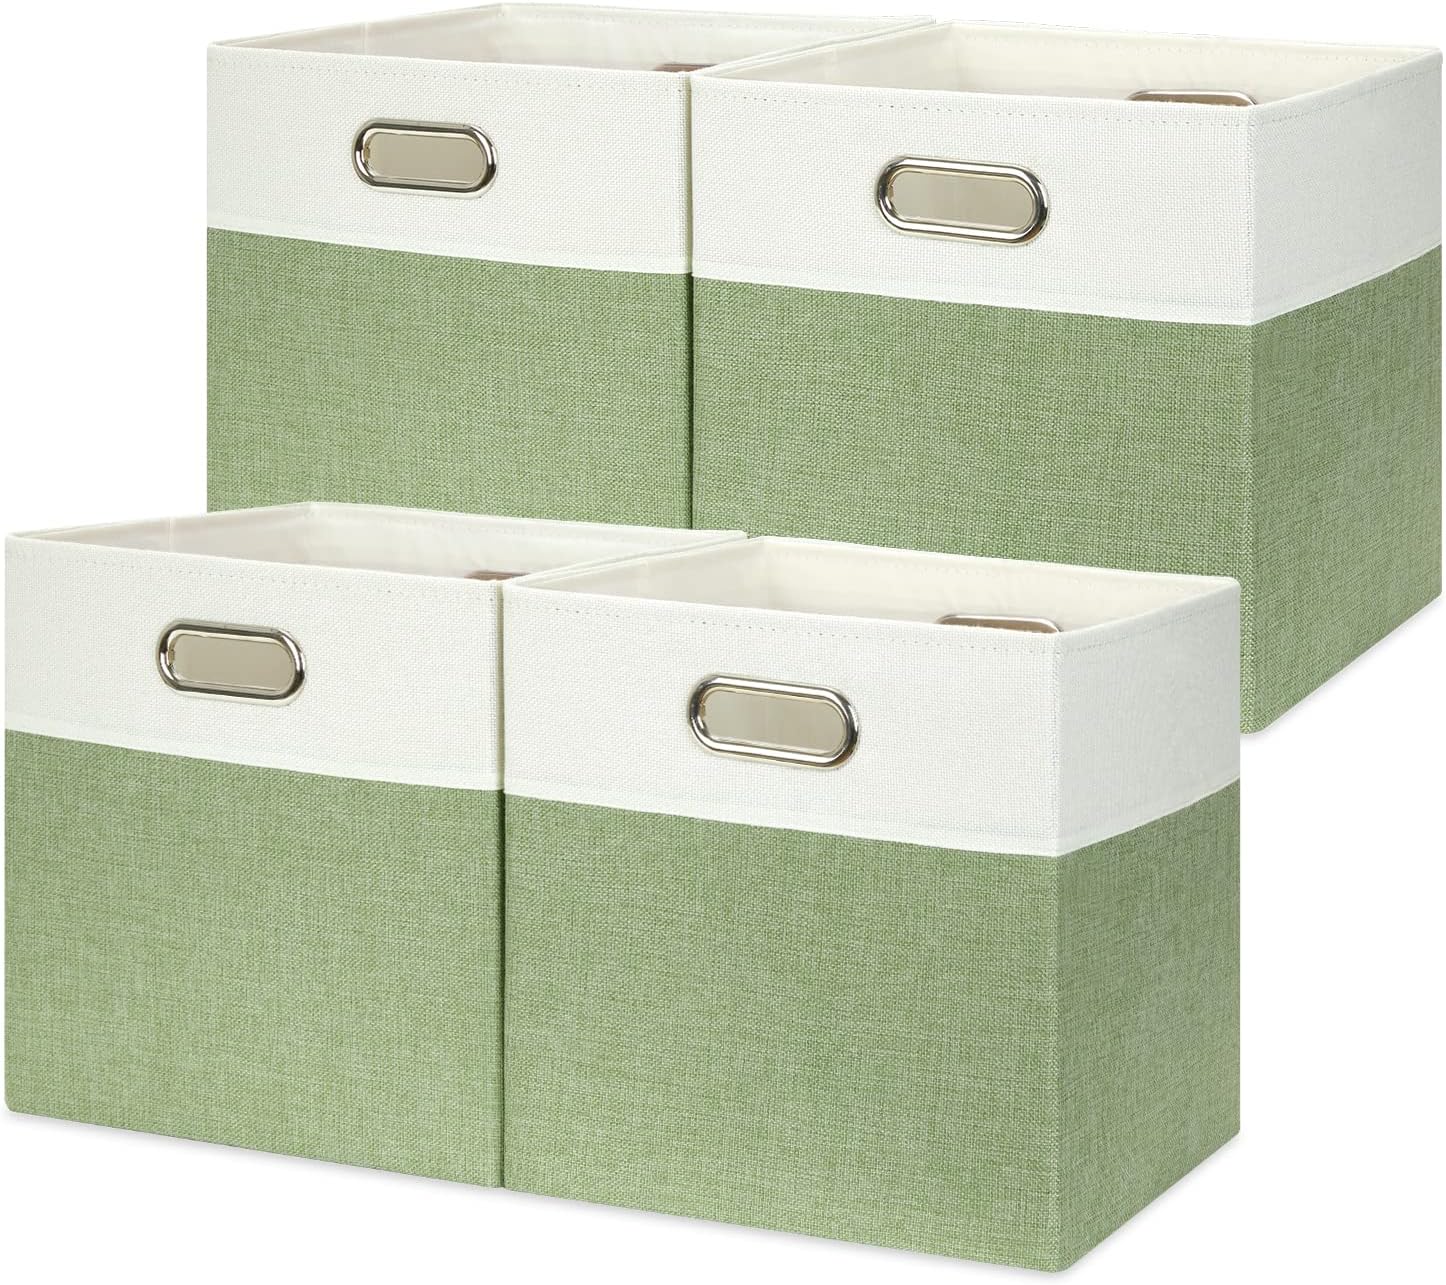 Temary Fabric Storage Cubes 11x11 Cube Storage Bins with Handles, 4 Pack Canvas Cube Storage Boxes Green Baskets for Organizing Closet, Foldable Cloth Baskets for Shelves (White&Green)